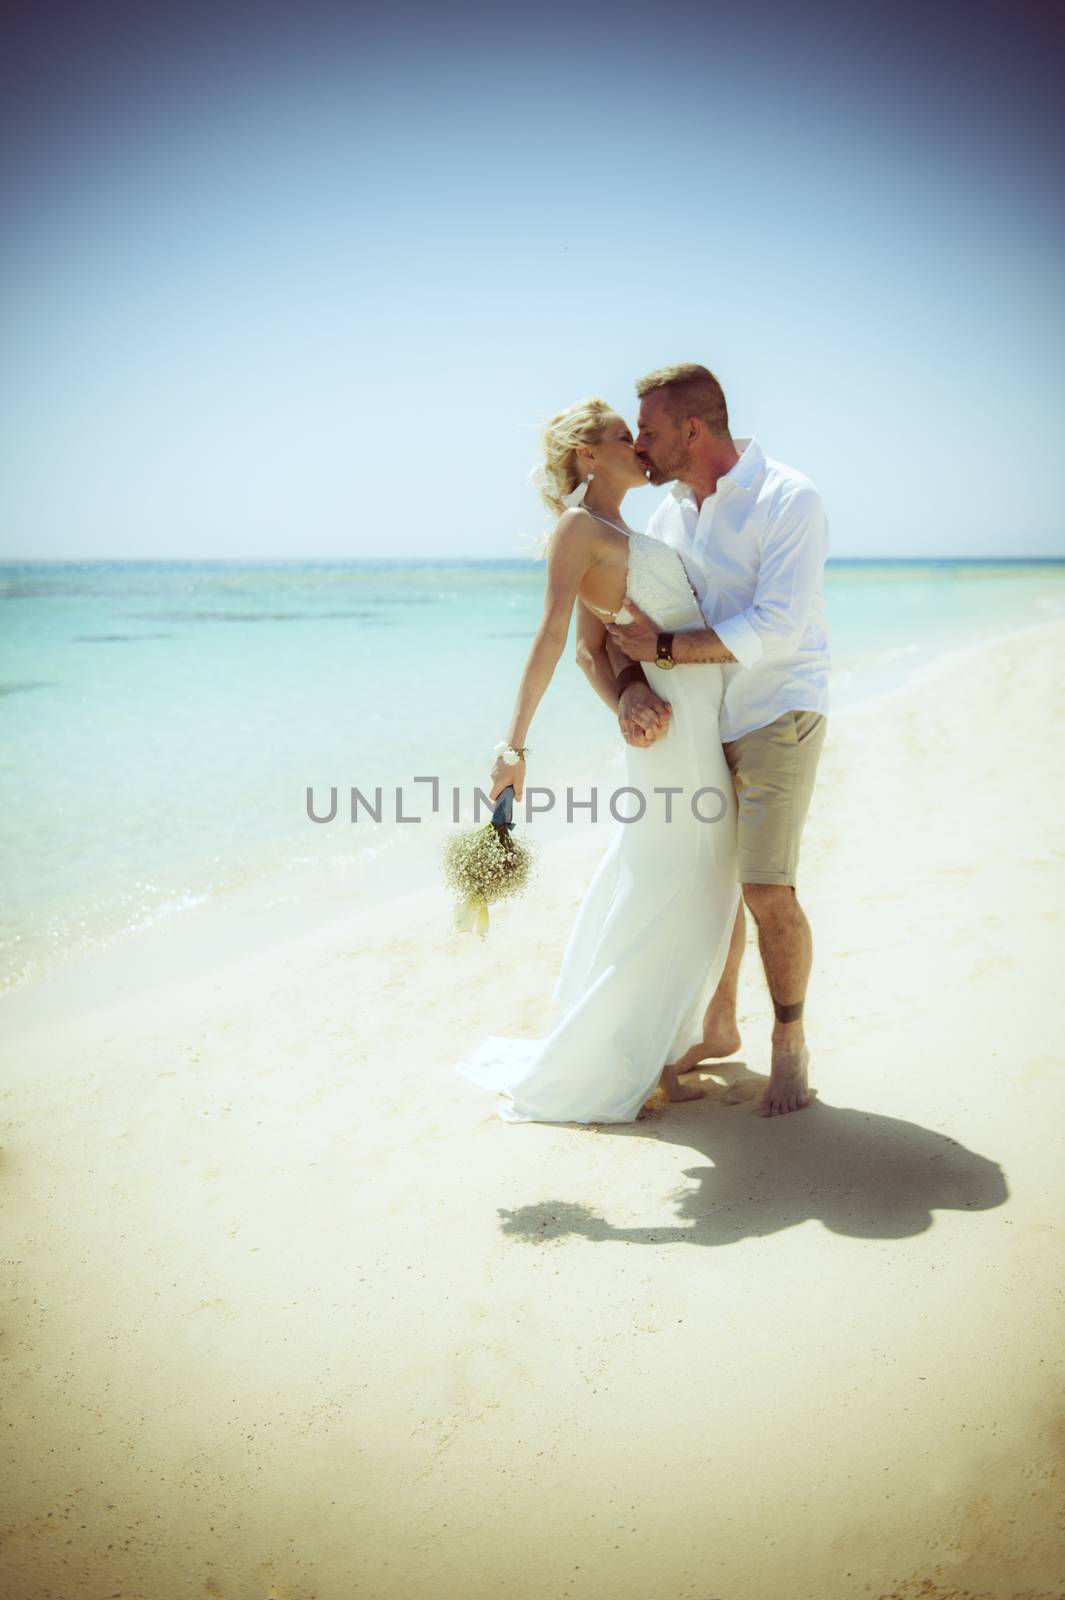 Beautiful married couple kissing at a tropical beach paradise on wedding day in white gown dress with ocean view vintage style photo